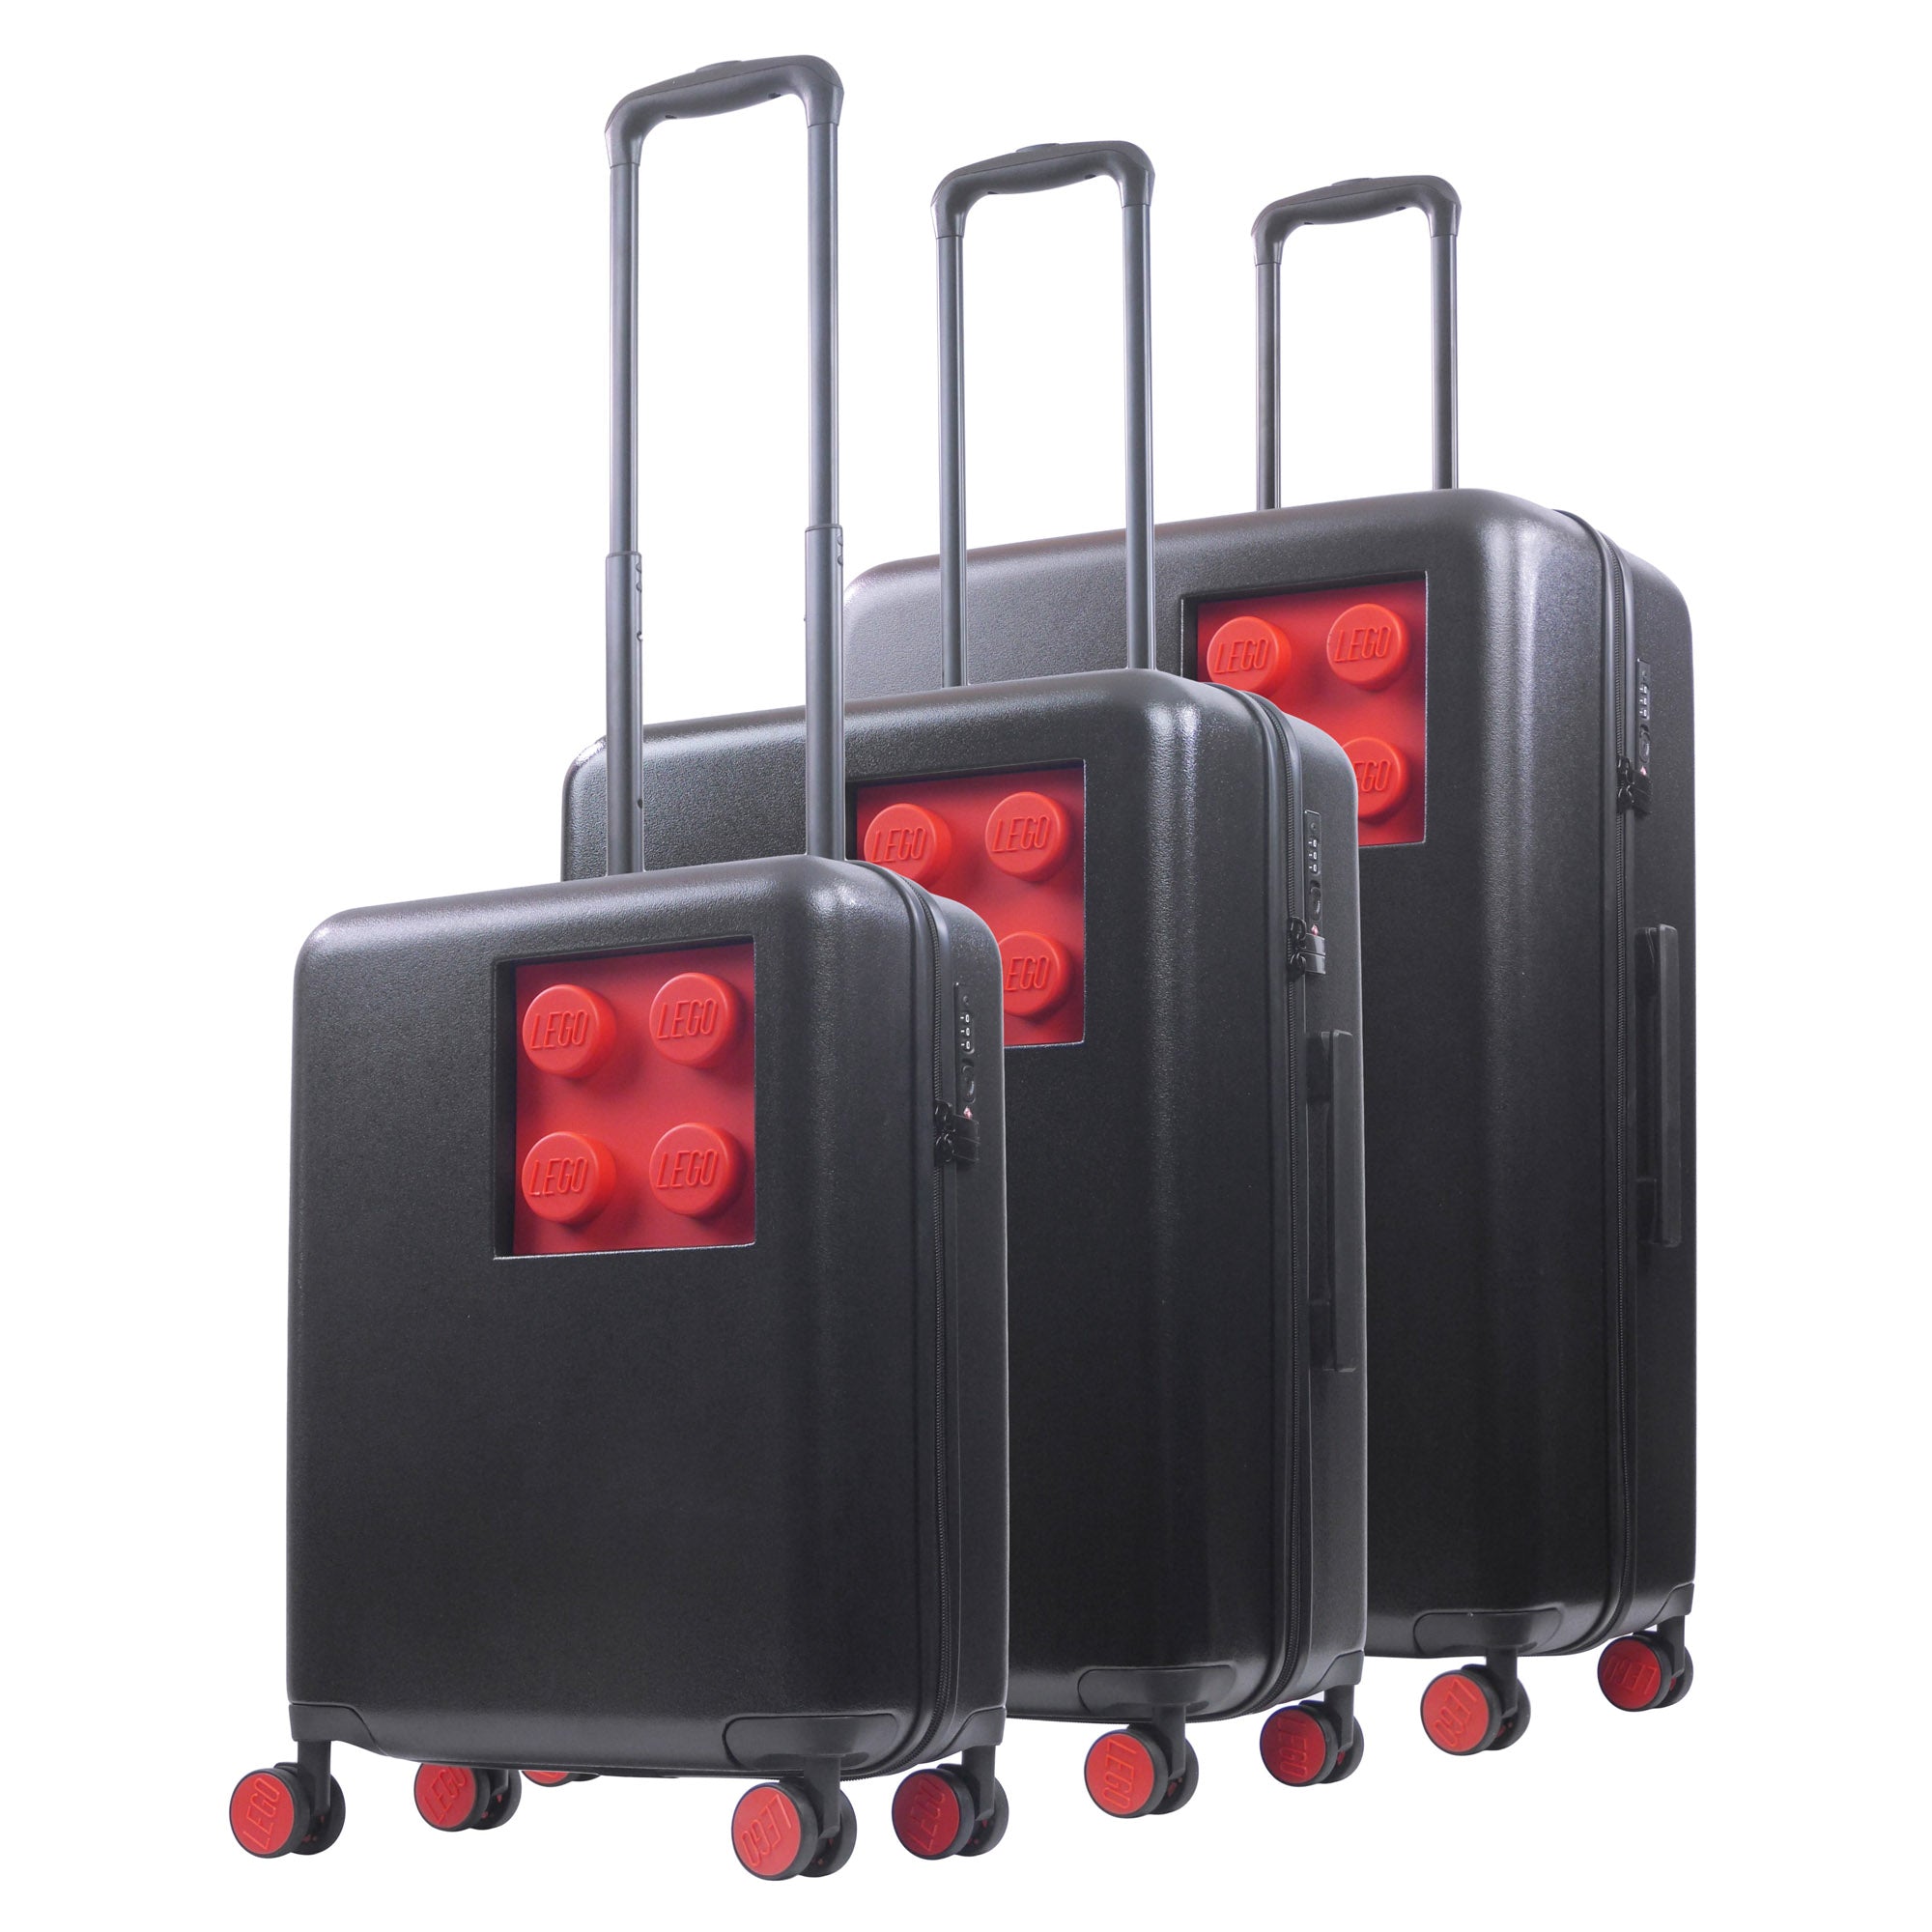 LEGO® Signature Brick Black Red Spinner Suitcase Luggage 3 pc Set - best durable suitcases for travel